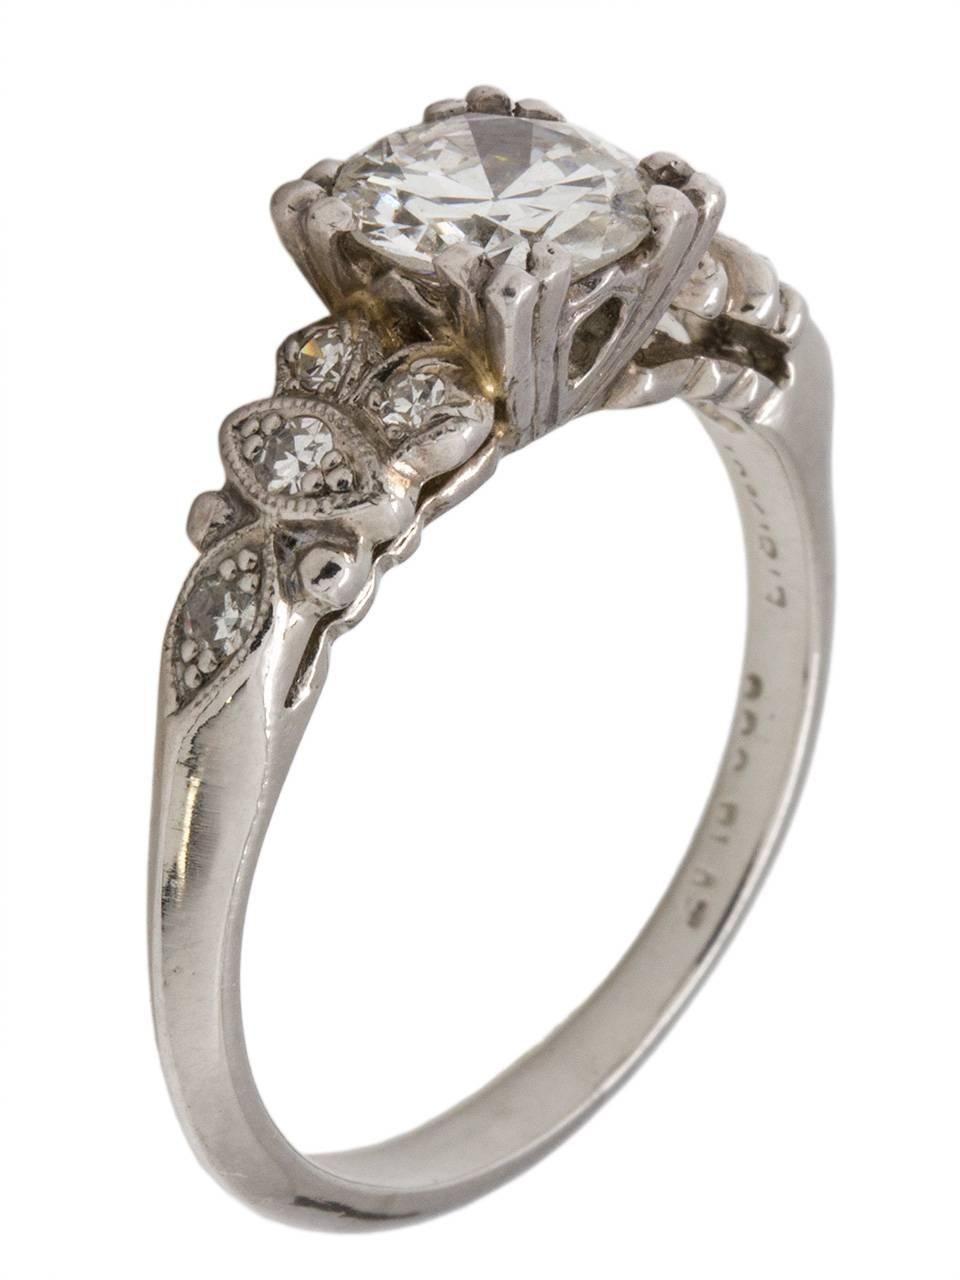 This beautiful 1930s platinum engagement ring stars a bright and fiery EGL certified  0.94ct Old European Cut center diamond, G-VS1. A whimsical marquise motif adorned with eight bead set round side diamonds are the perfect accent to the elevated